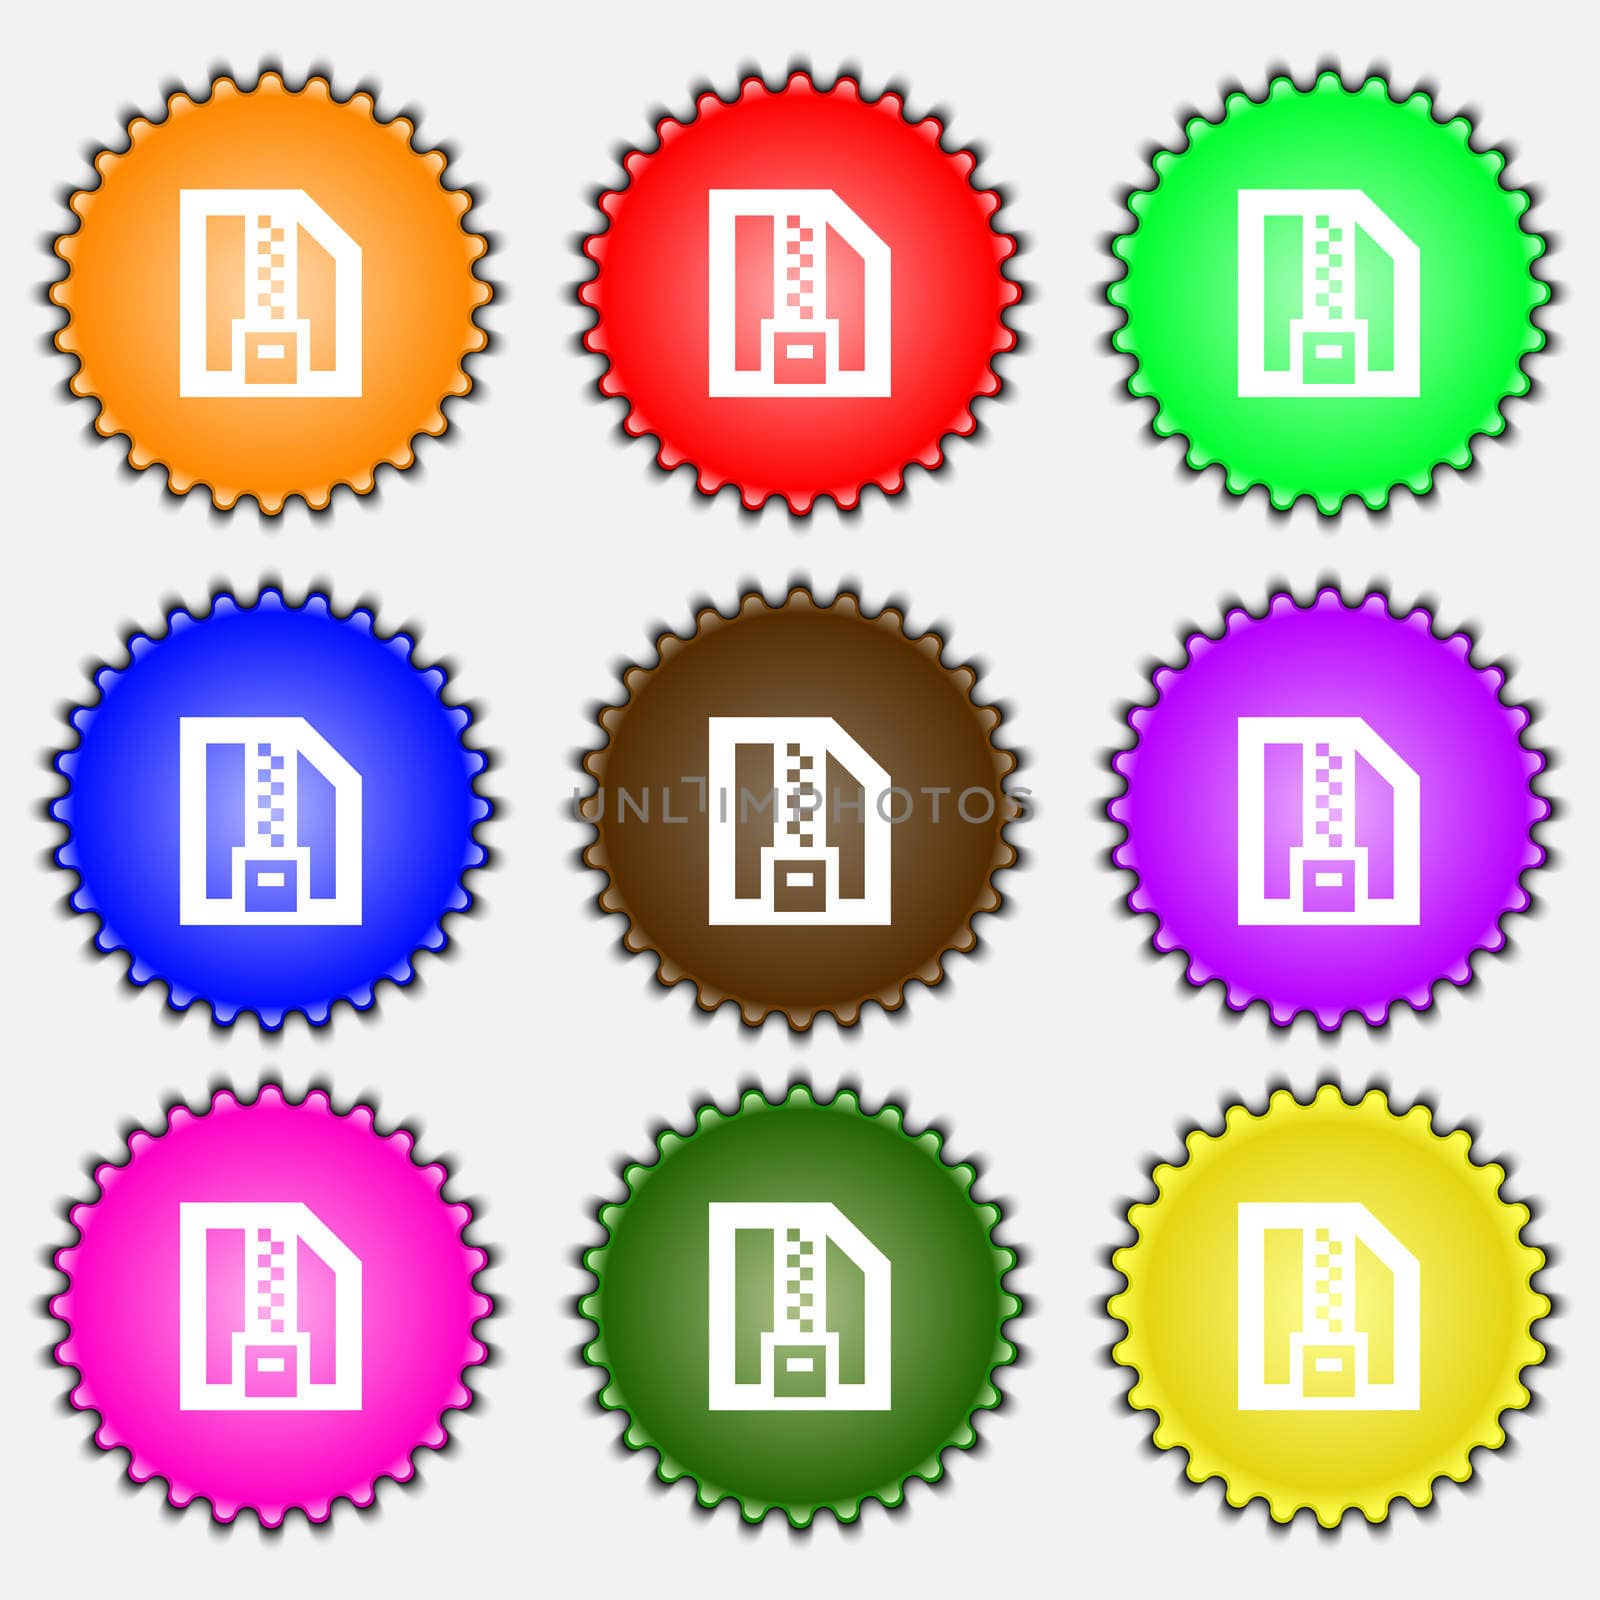 Archive file, Download compressed, ZIP zipped icon sign. A set of nine different colored labels.  by serhii_lohvyniuk